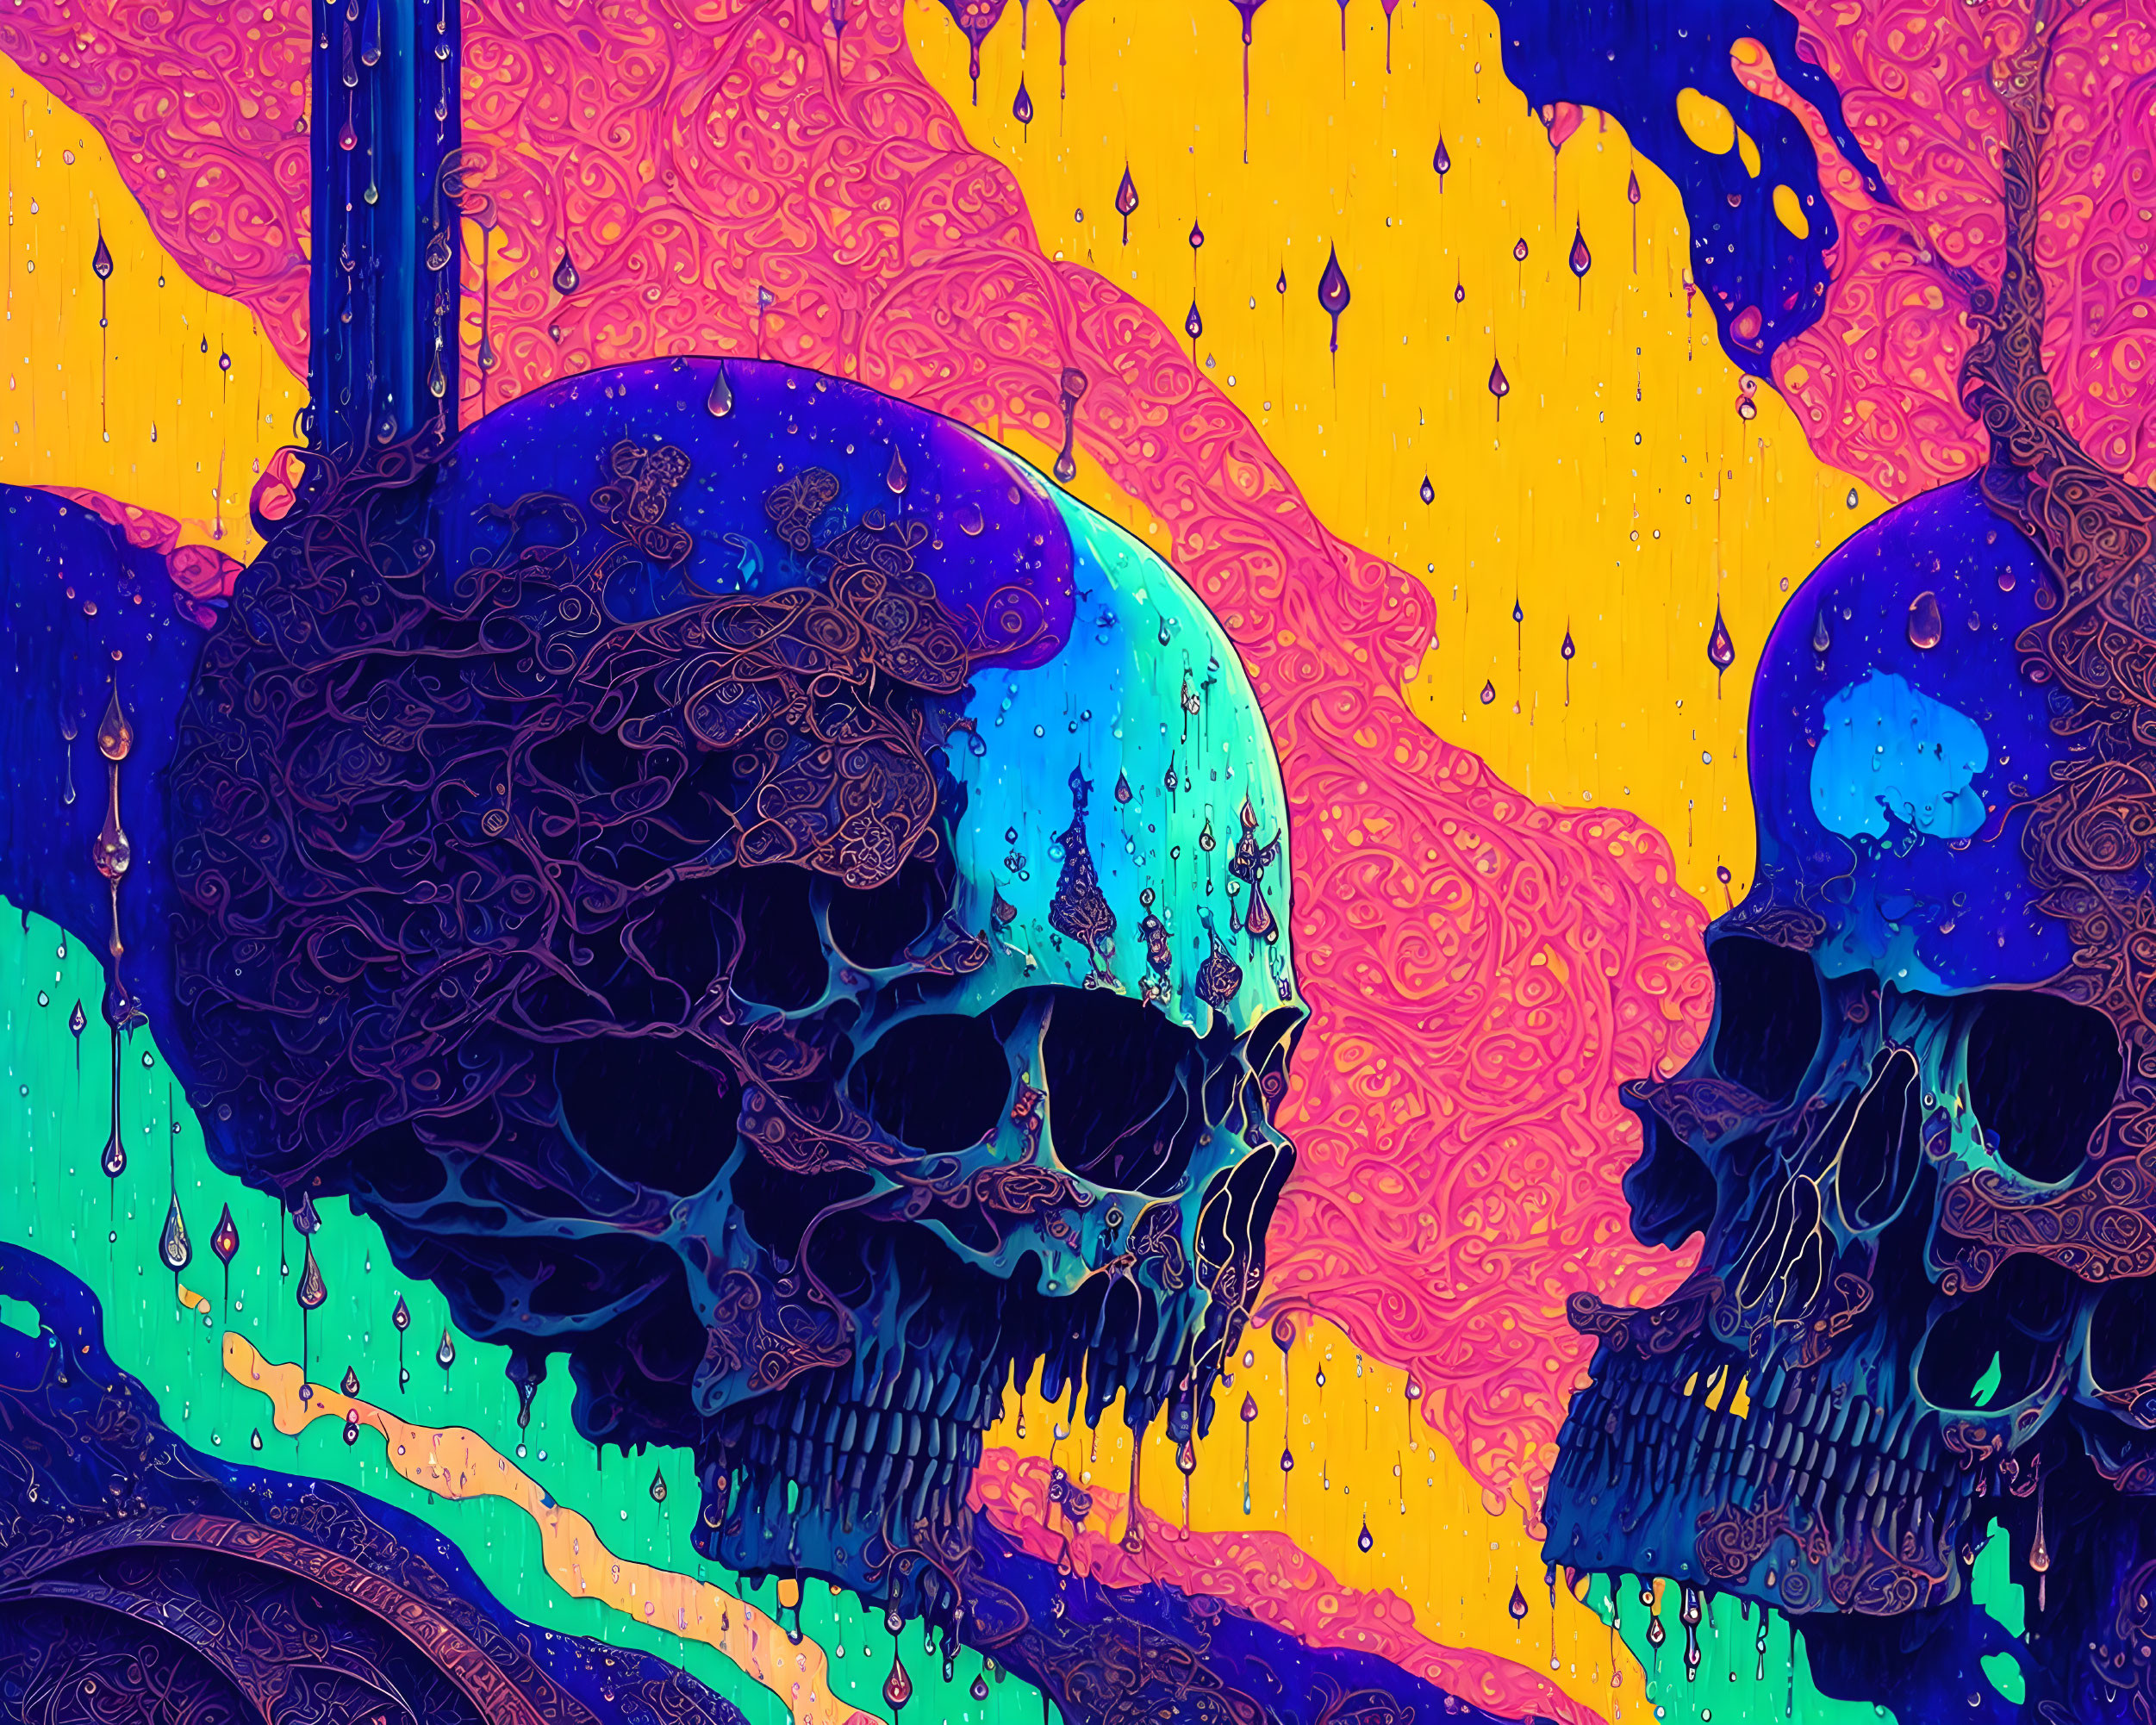 Colorful psychedelic skull art on vibrant background